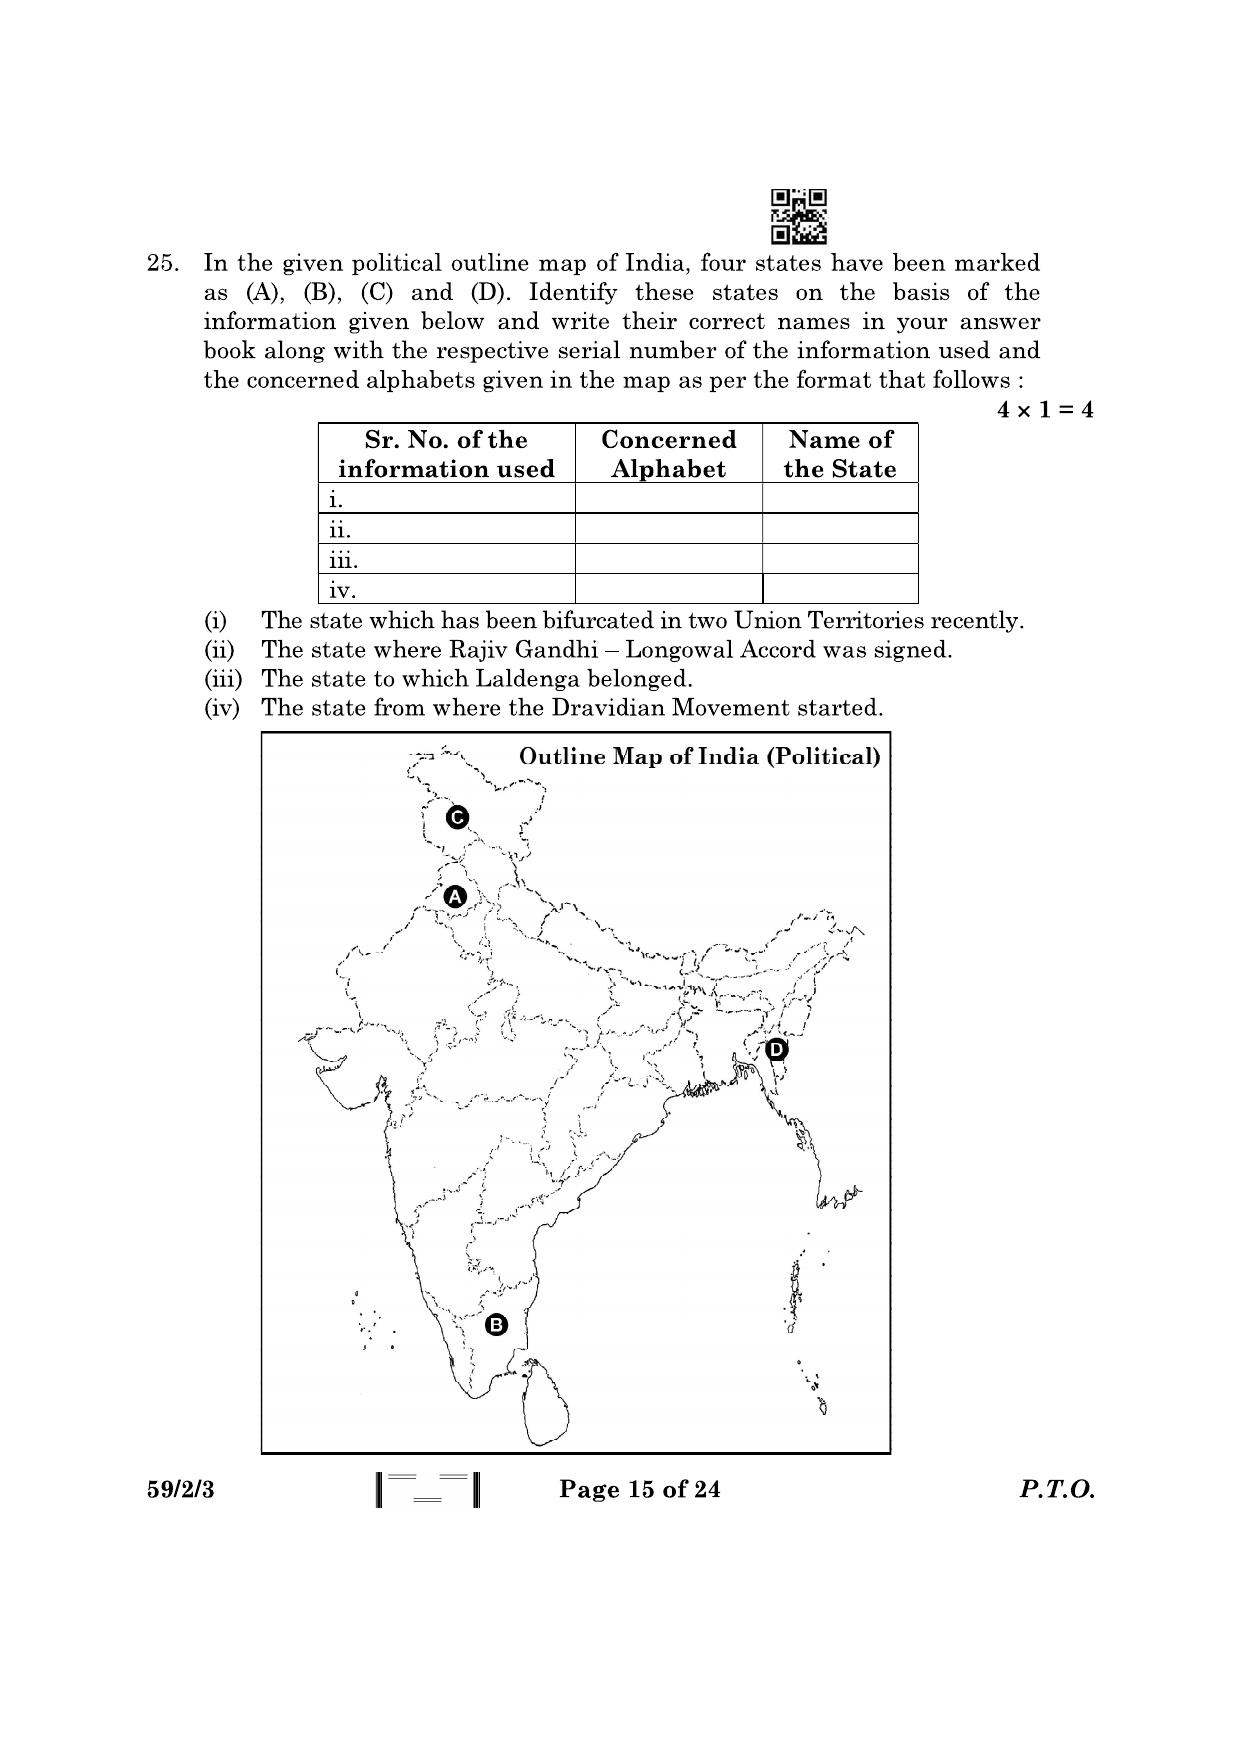 CBSE Class 12 59-2-3 Political Science 2023 Question Paper - Page 15